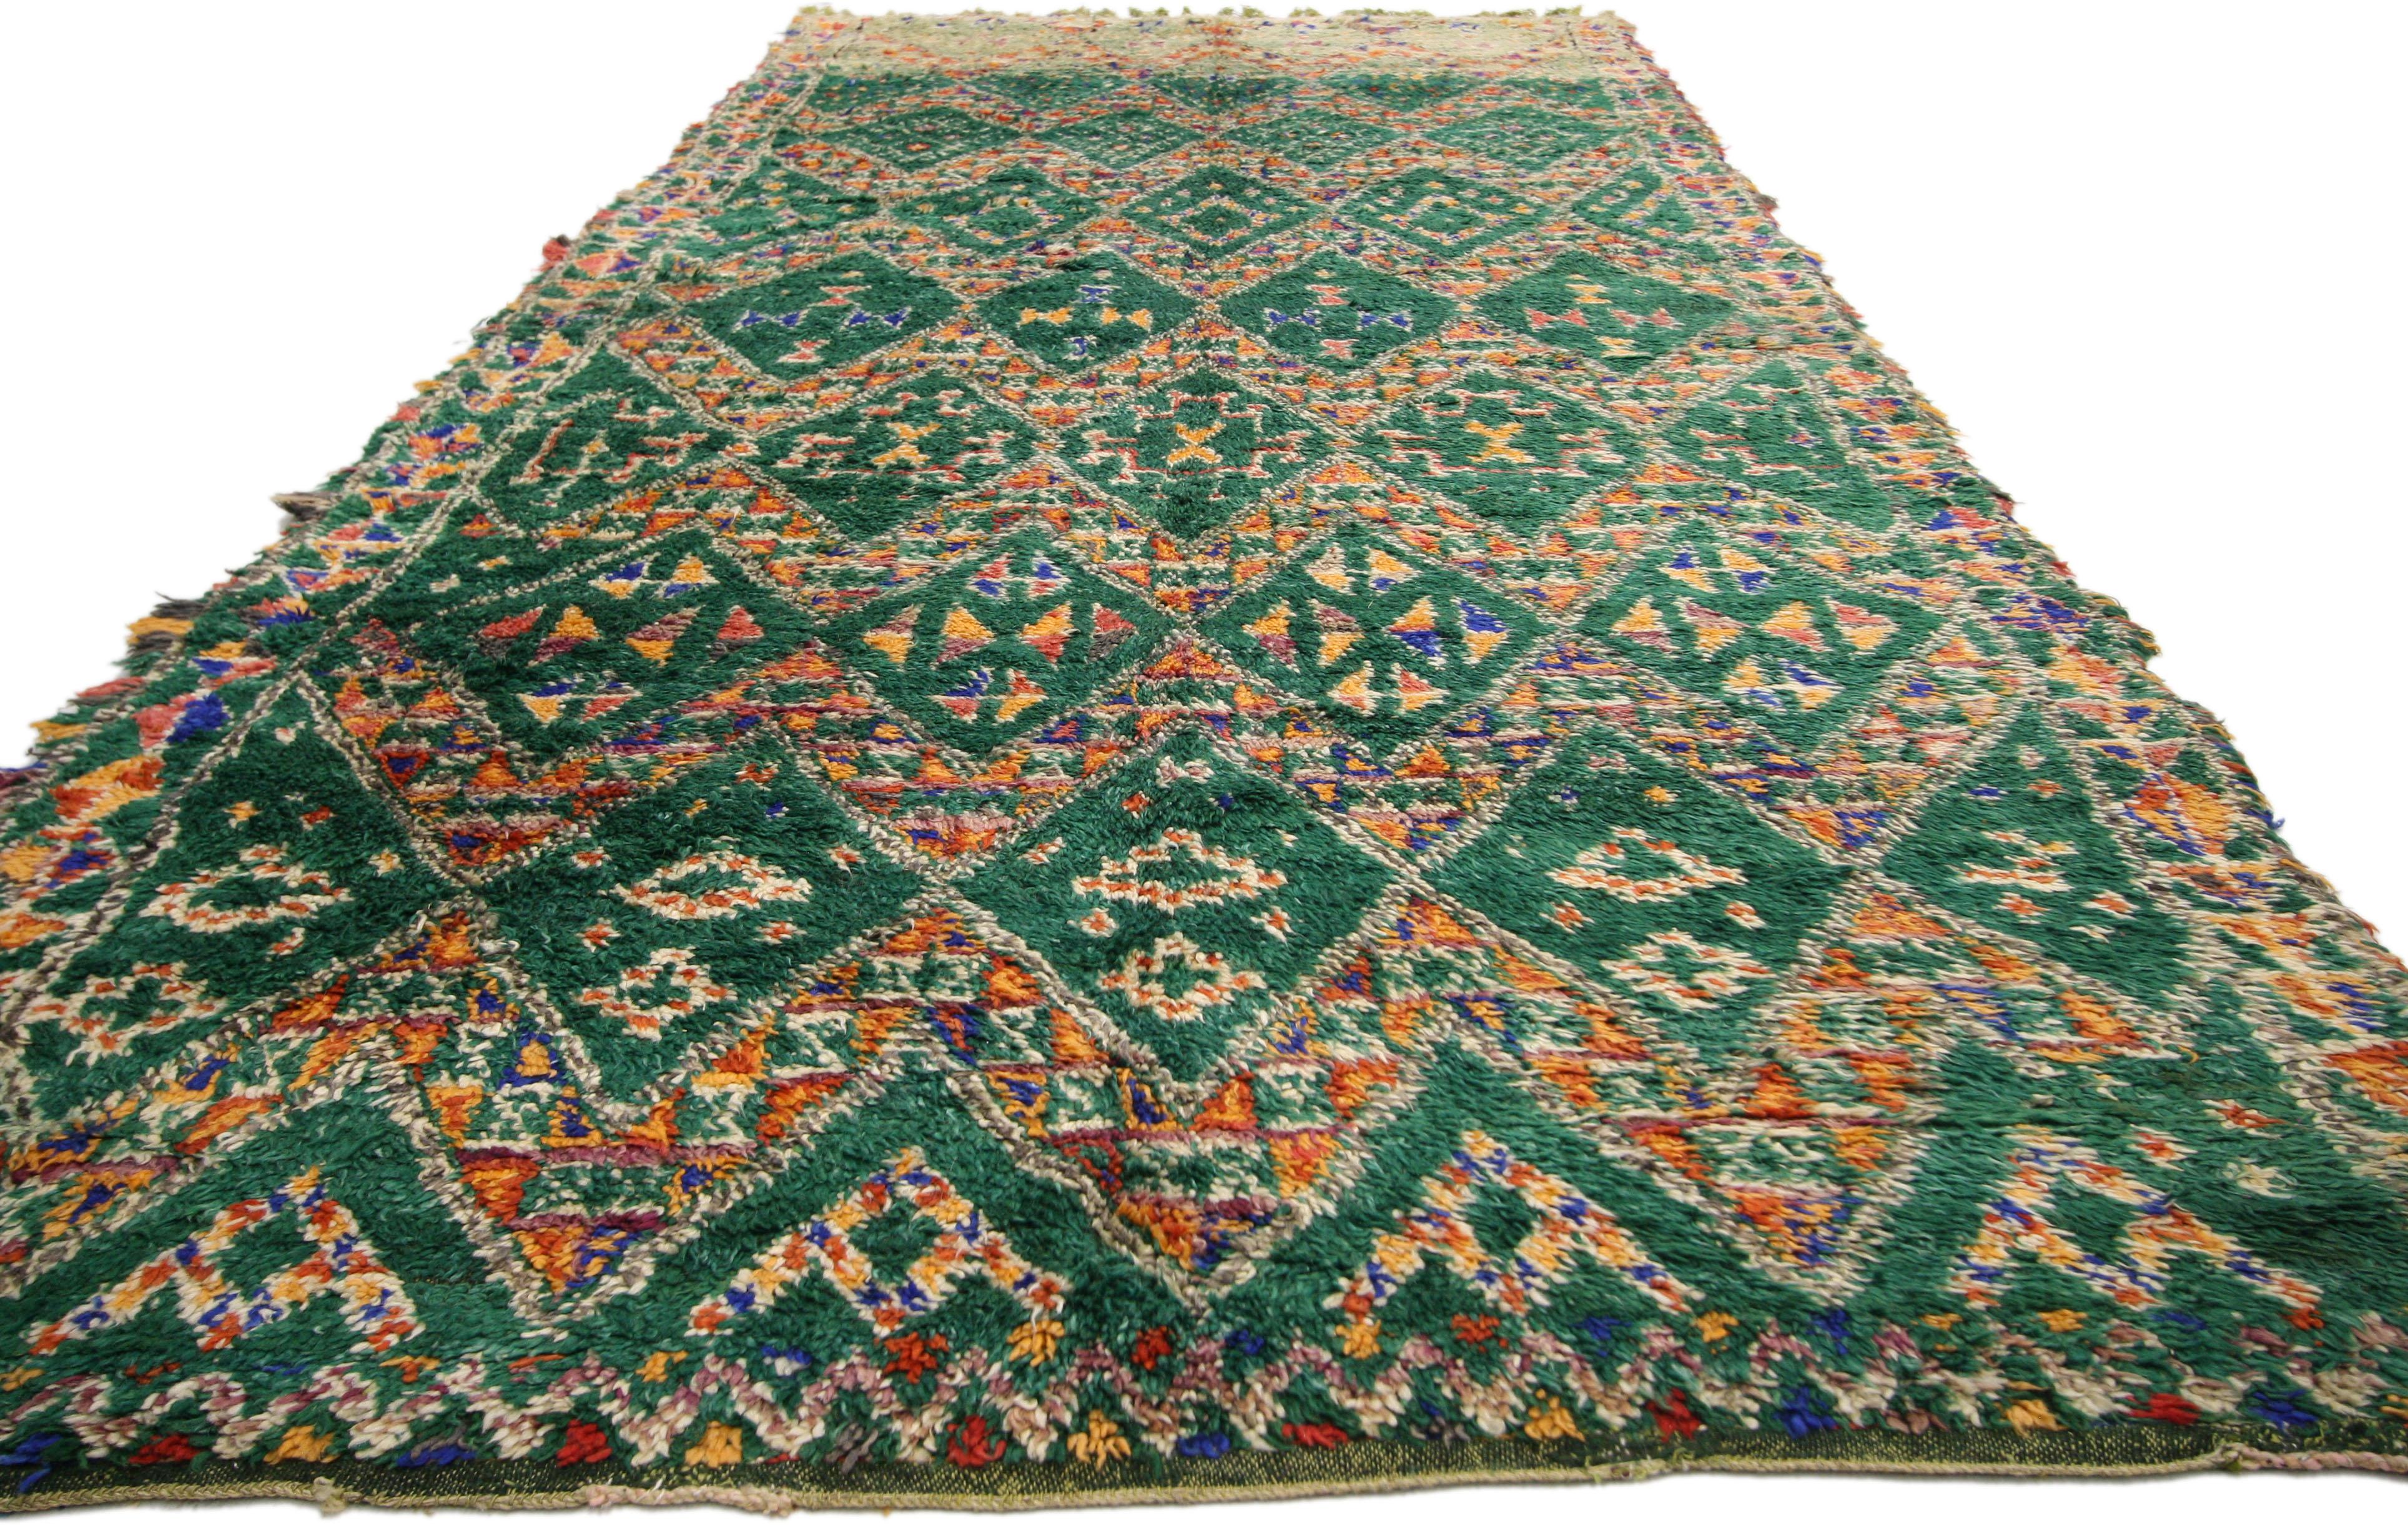 Hand-Knotted Vintage Green Beni M'Guild Moroccan Rug with Tribal Style, Berber Moroccan Rug